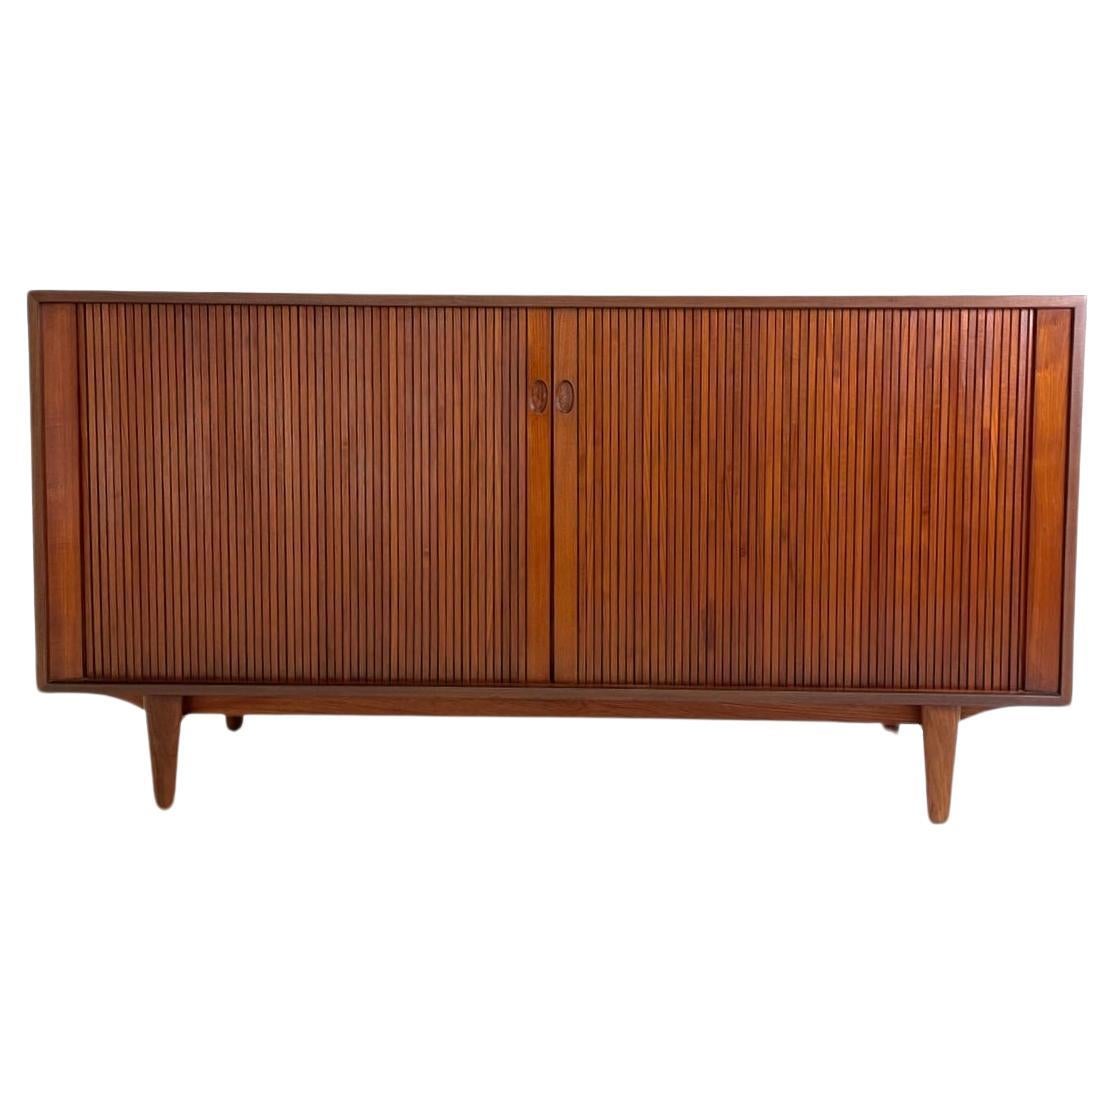 Ib Kofod-Larsen for J. Clausen Brande Møbelfabrik Danish Modern Teak Credenza with Tambour Doors. Designed in the 1960s in Denmark by a master craftsman, IB Kofod Larsen, this tambour door credenza slides open smoothly to reveal 2 drawers on the